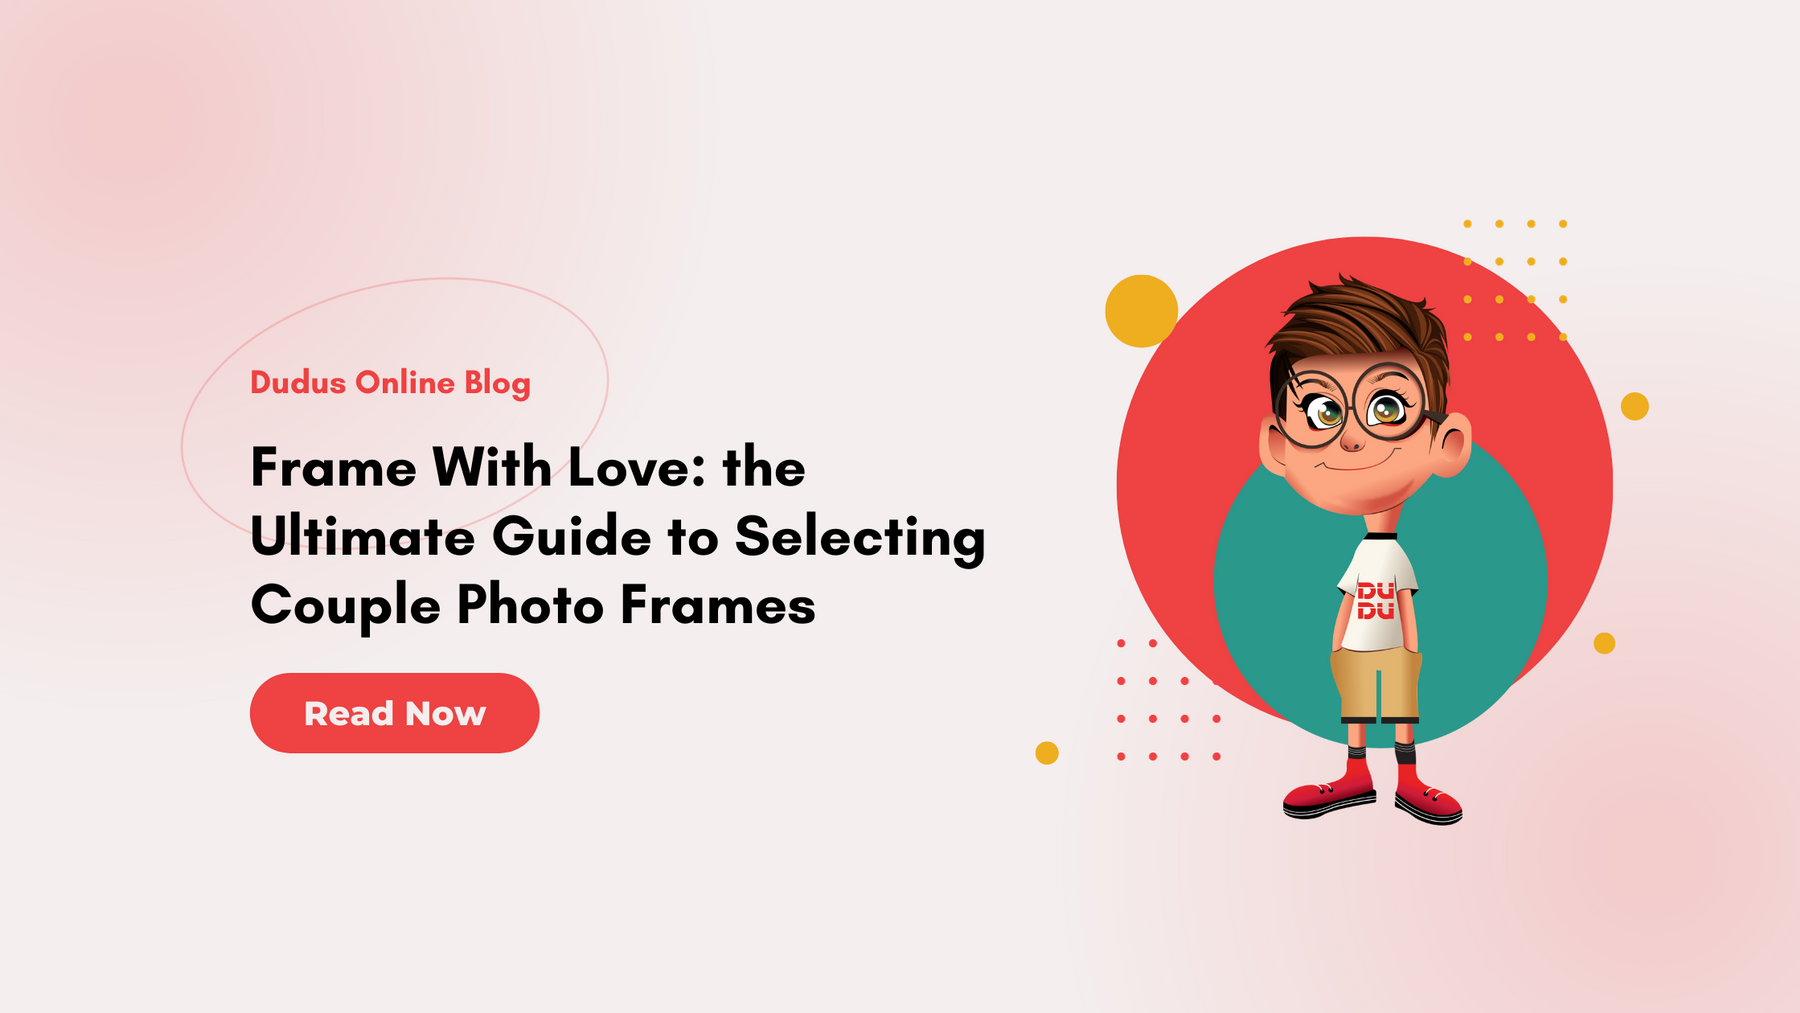 Frame With Love: the Ultimate Guide to Selecting Couple Photo Frames